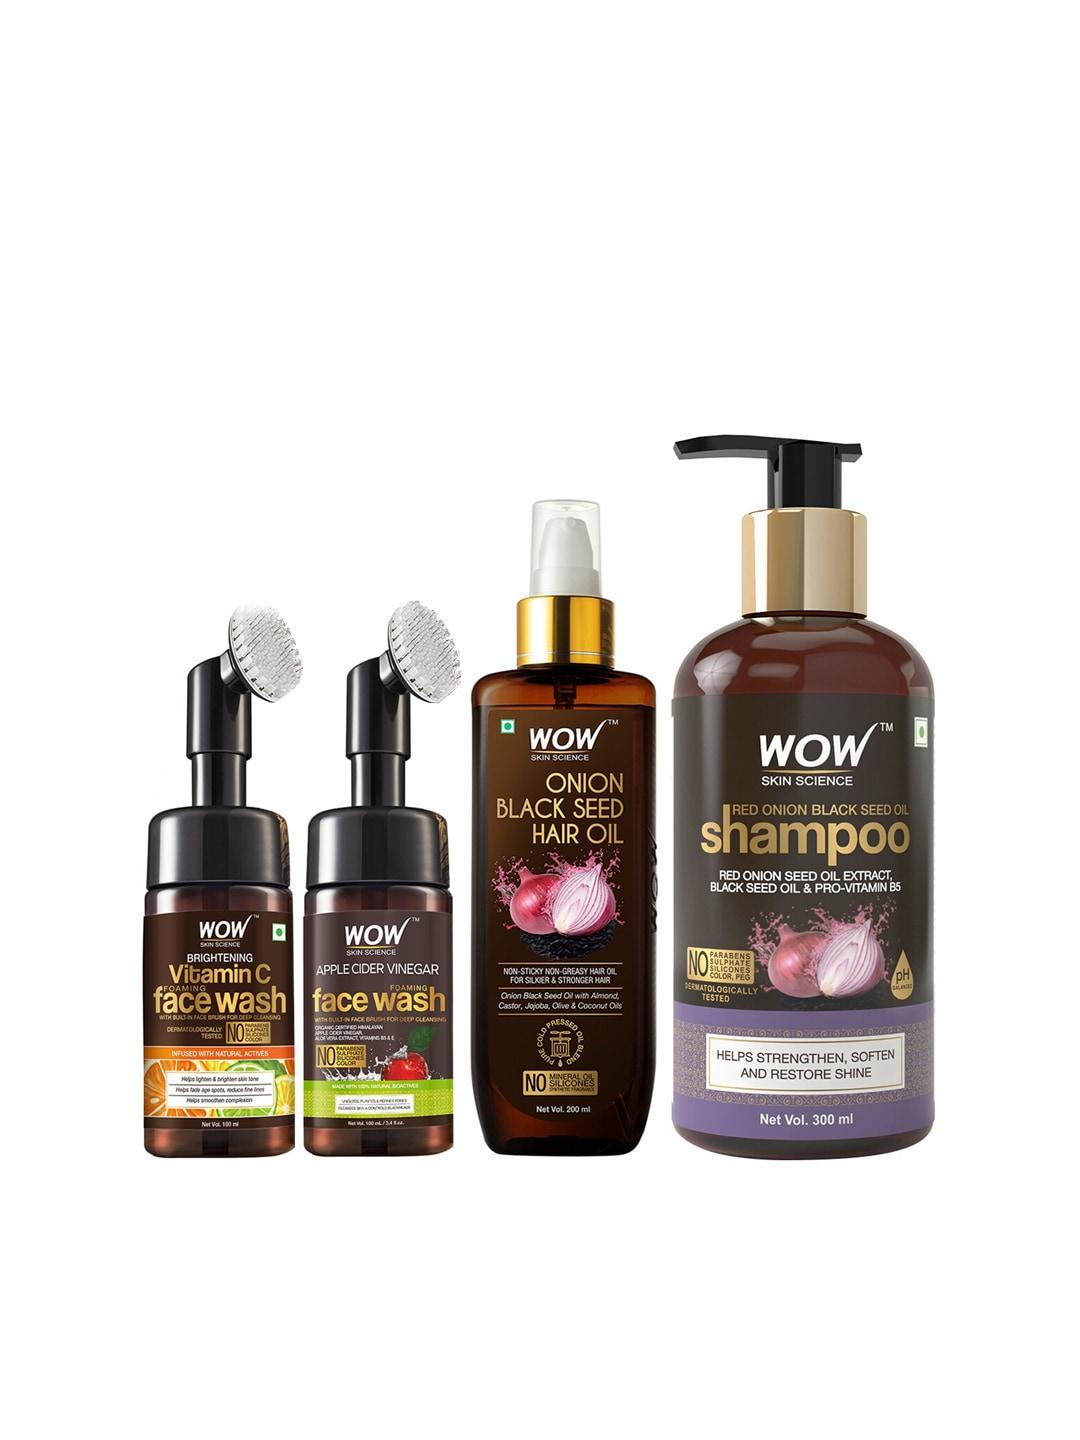 wow-skin-science-set-of-hair-oil---shampoo-&-2-face-wash